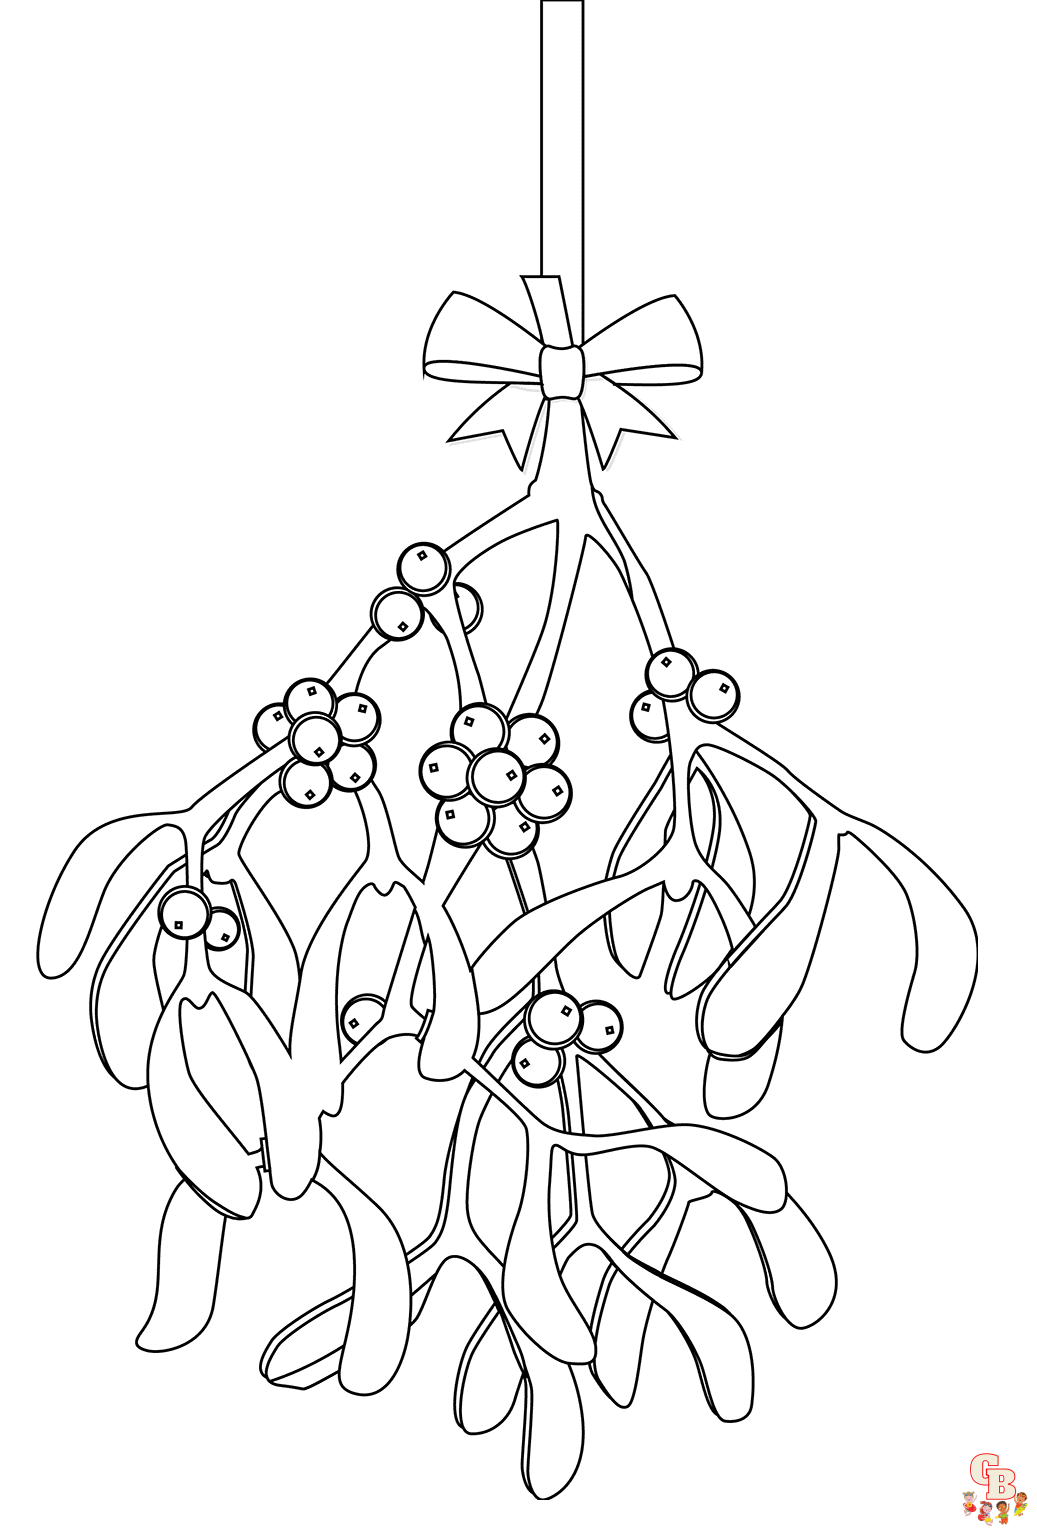 Mistletoe coloring pages to print